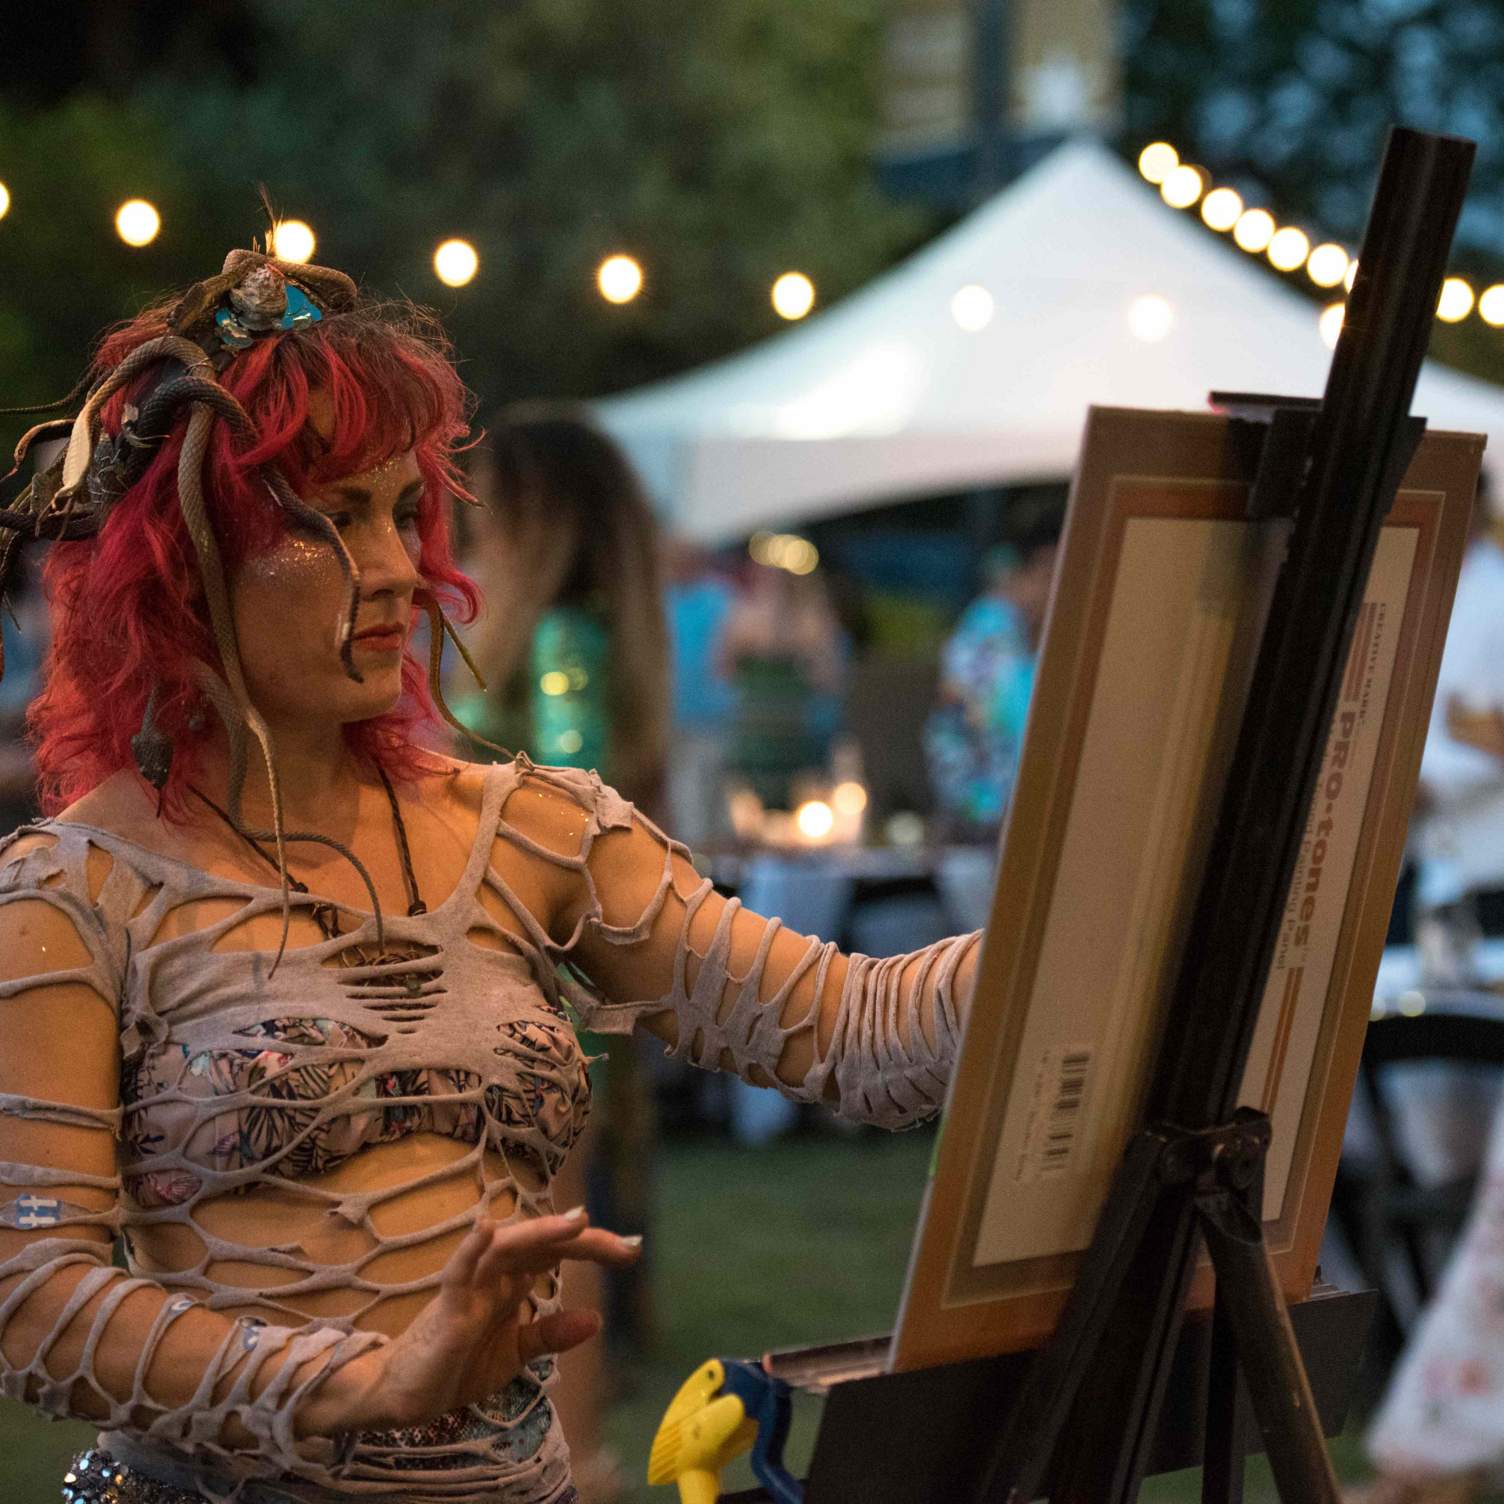 a woman dressed as a mermaid paints at the mermaid society ball